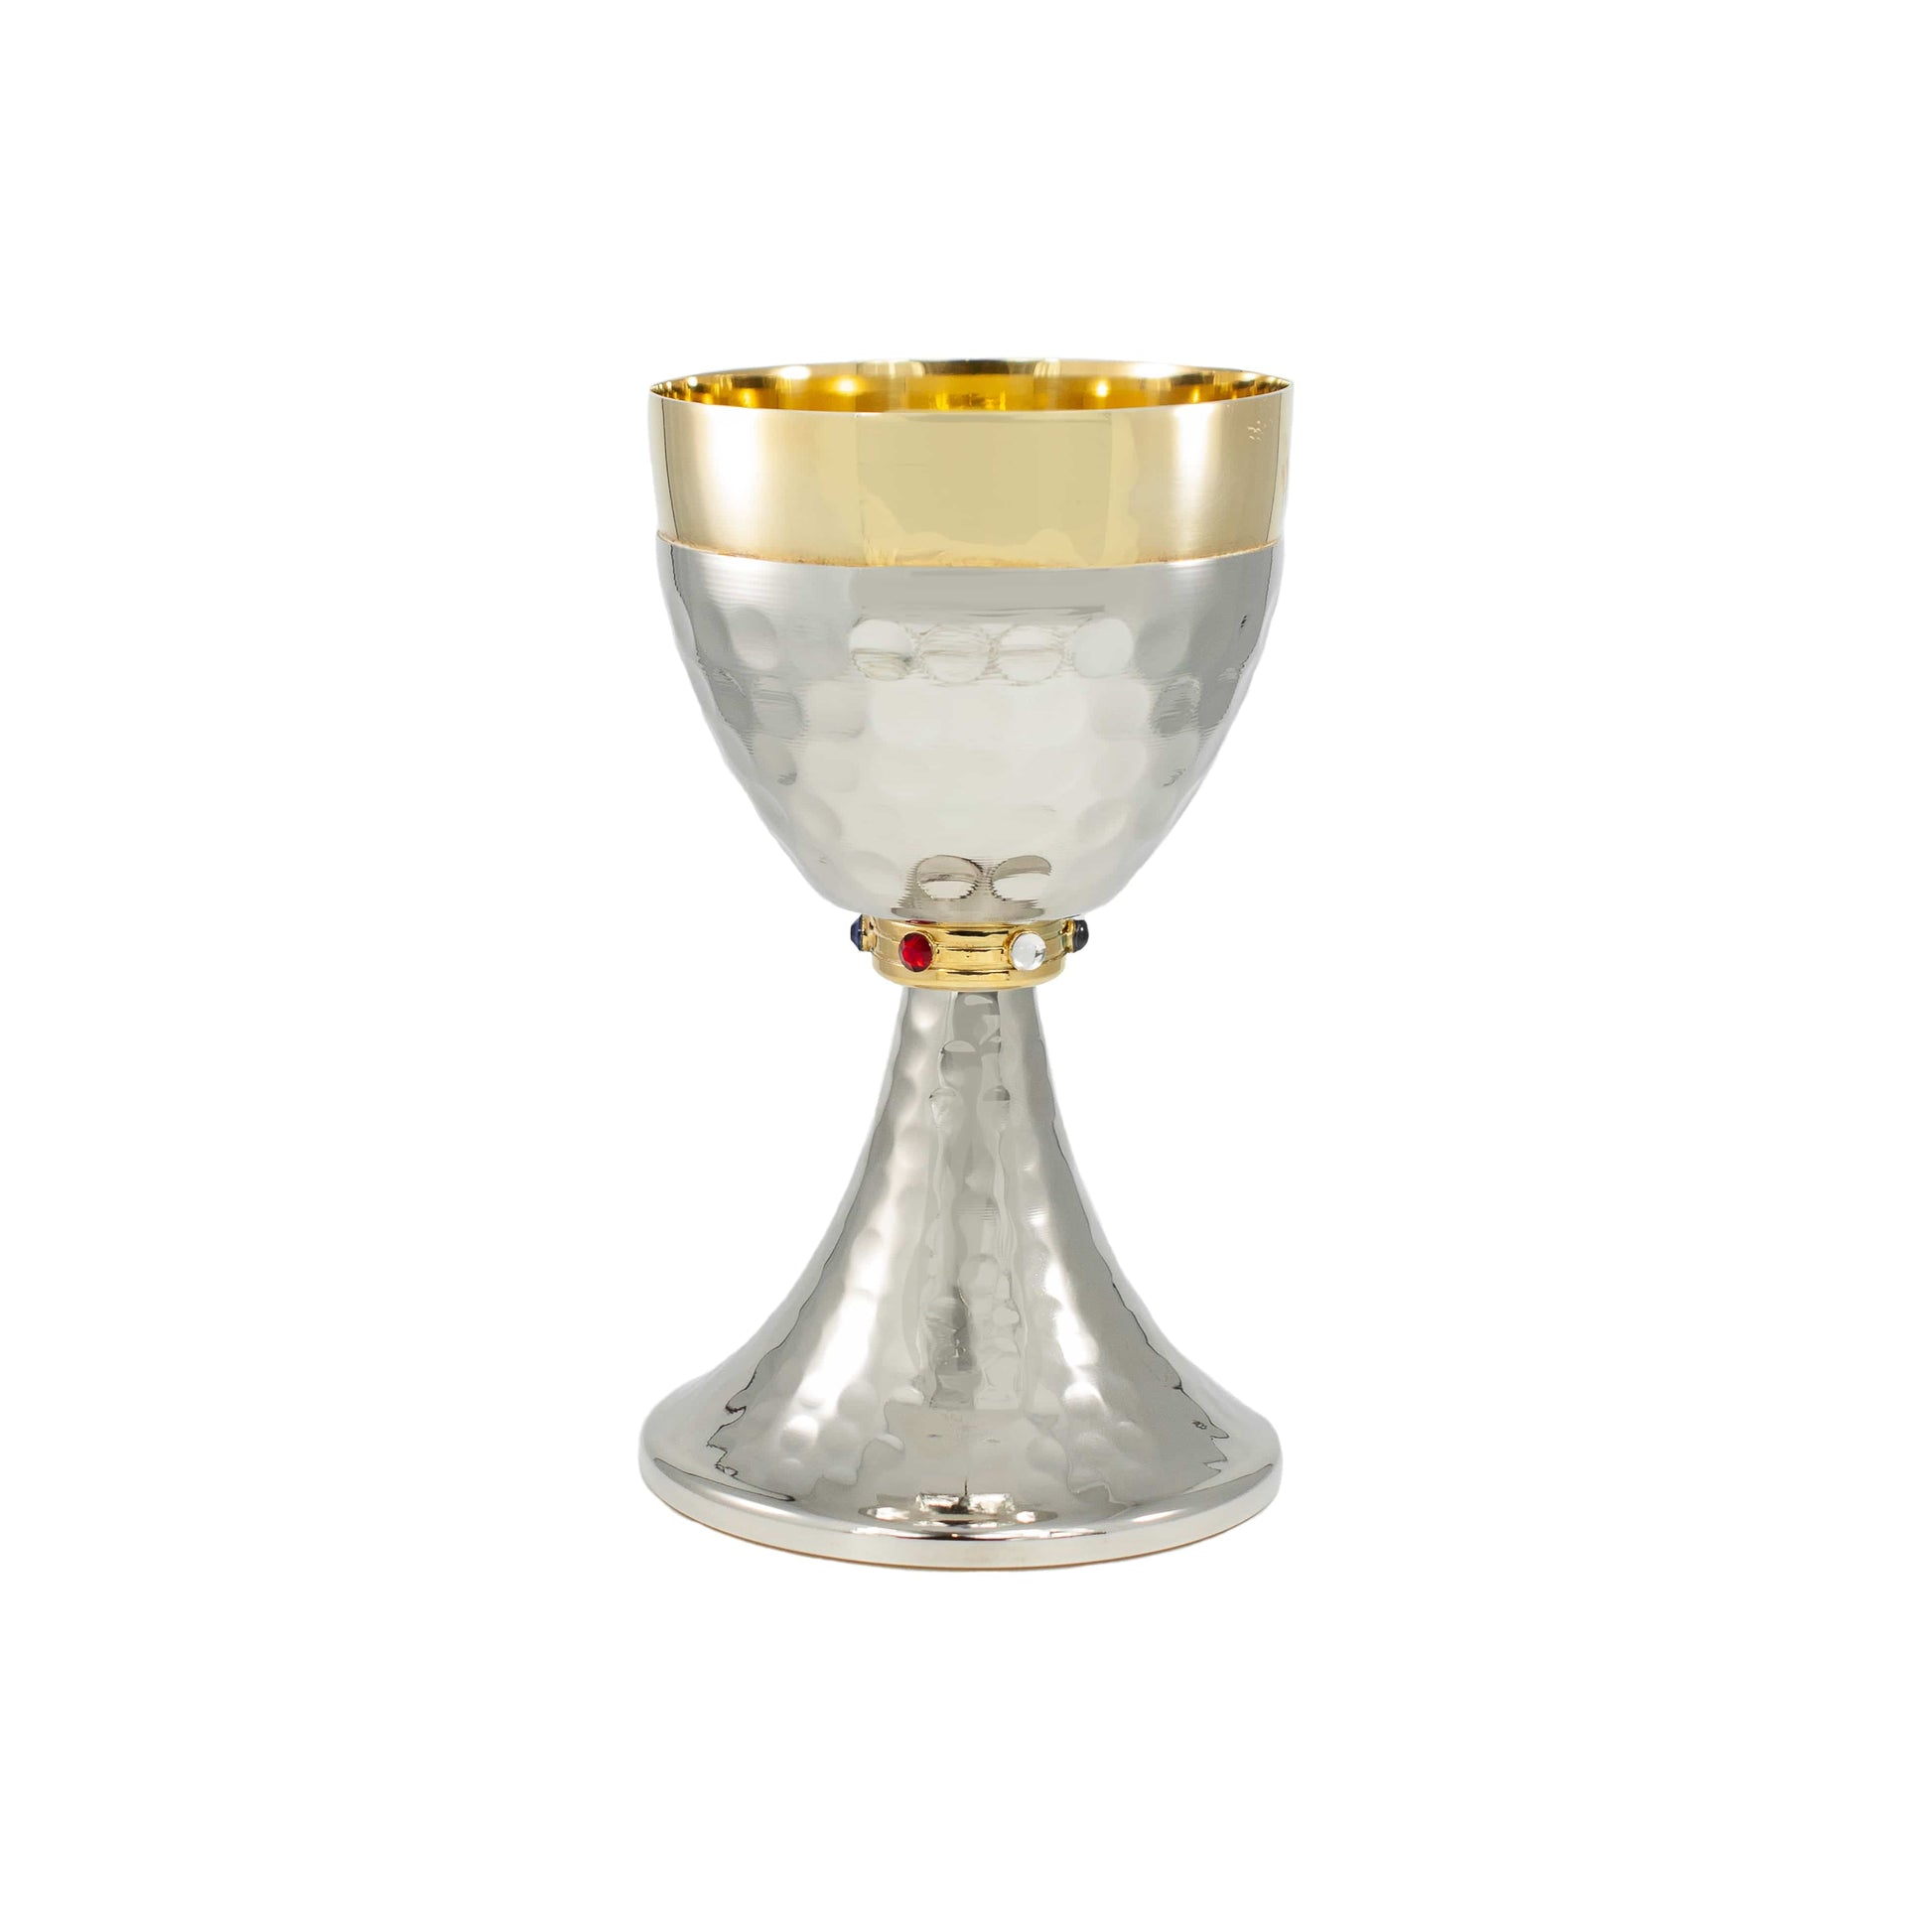 MONDO CATTOLICO Golden and Silver Brass Chalice with Stones